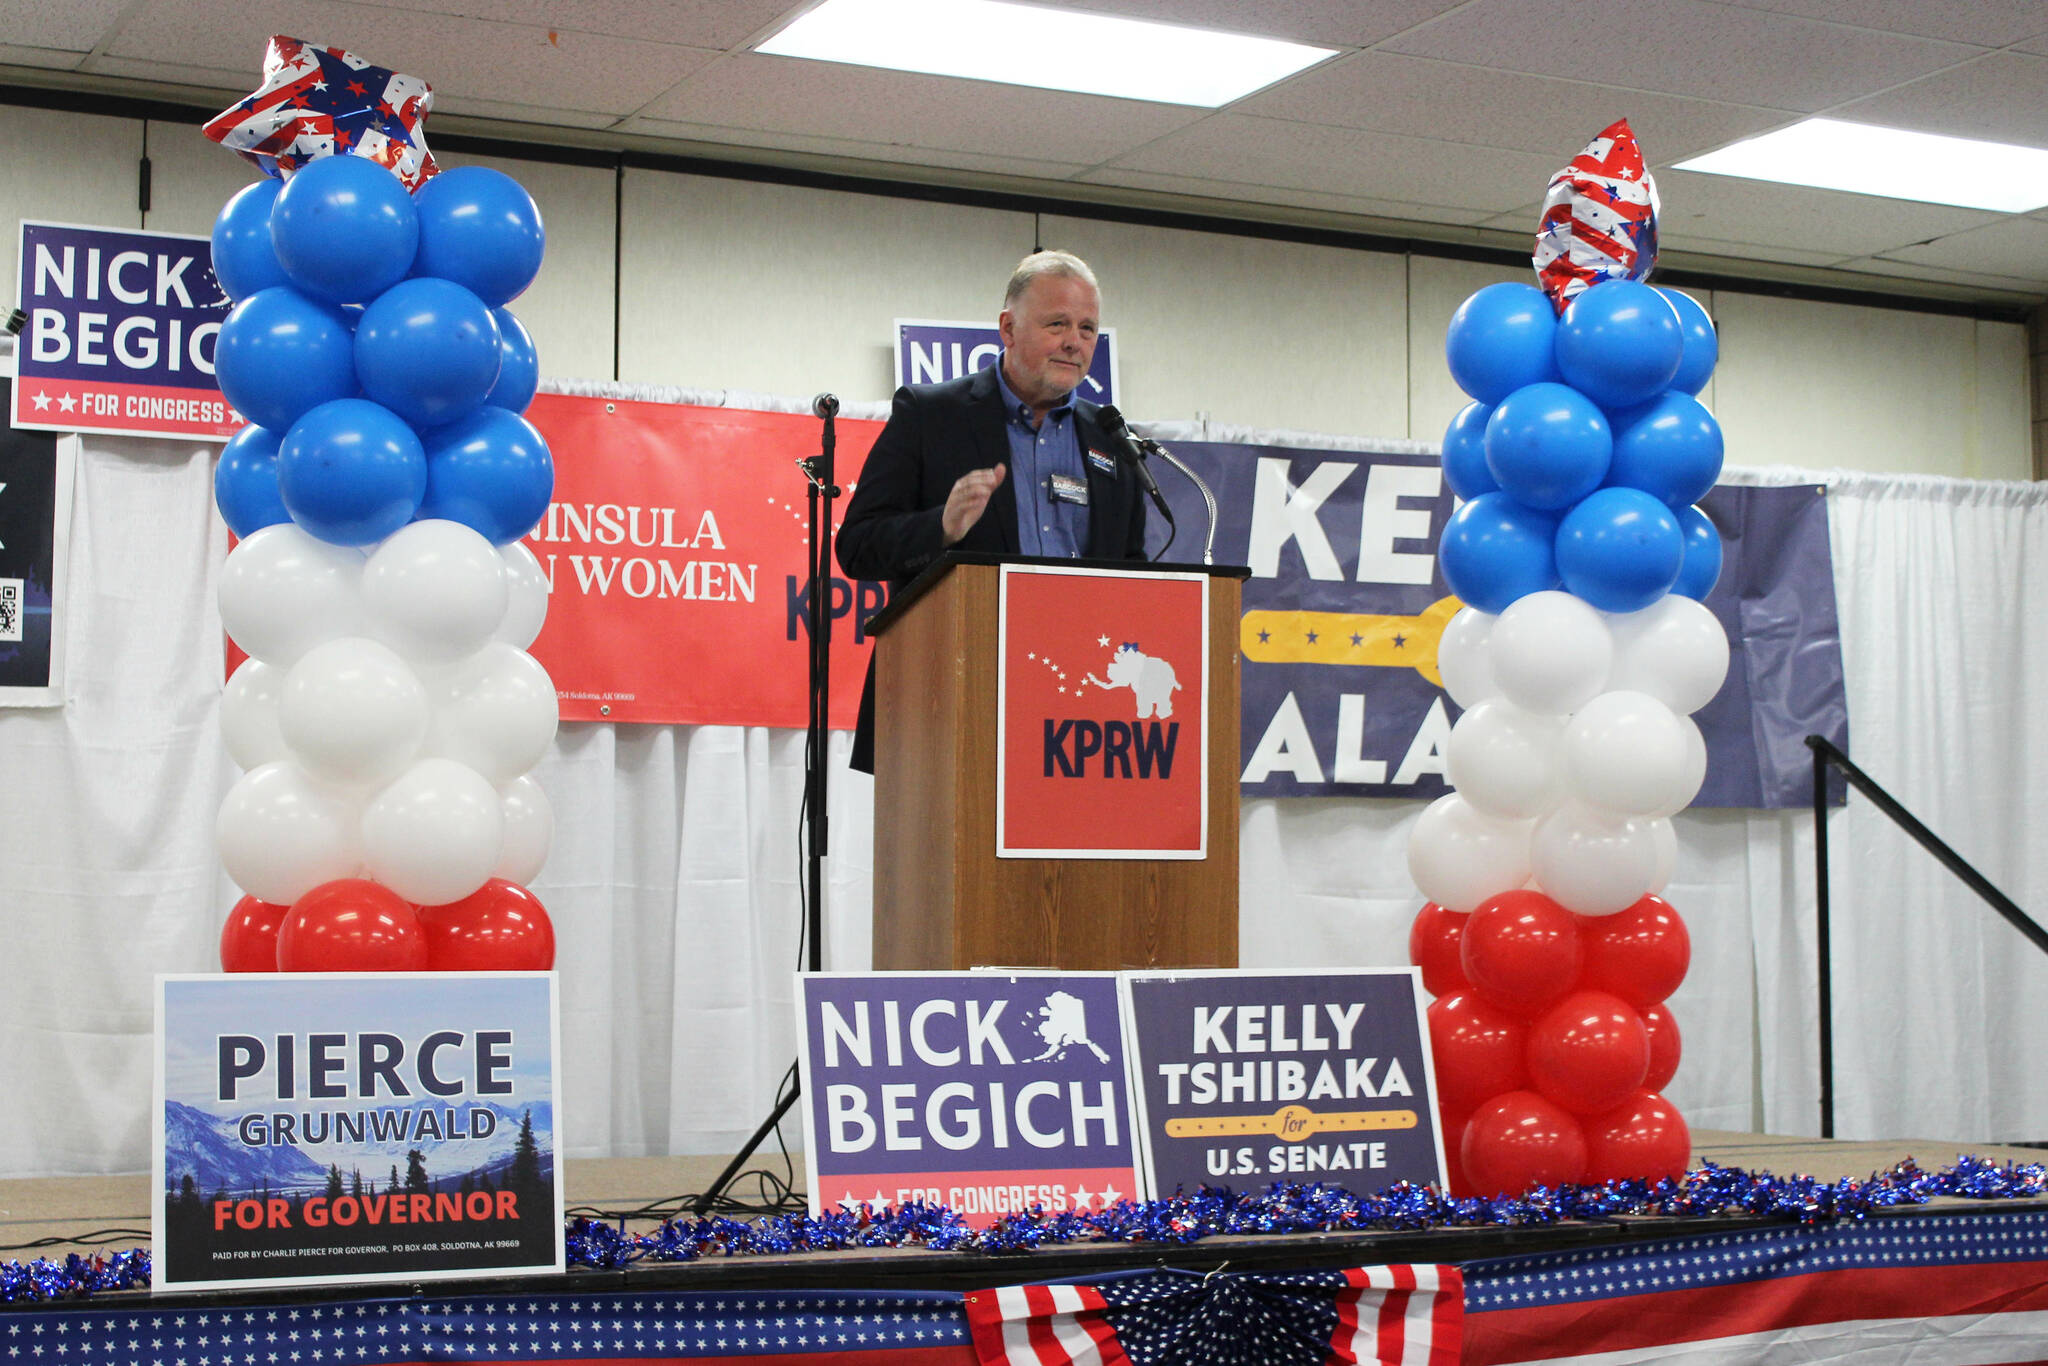 Alaska State Senate candidate Tuckerman Babcock emcees a "Get Out the Vote" rally hosted by the Kenai Peninsula Republican Women at the Soldotna Regional Sports Complex on Tuesday, Oct. 18, 2022 in Soldotna, Alaska. (Ashlyn O’Hara/Peninsula Clarion)